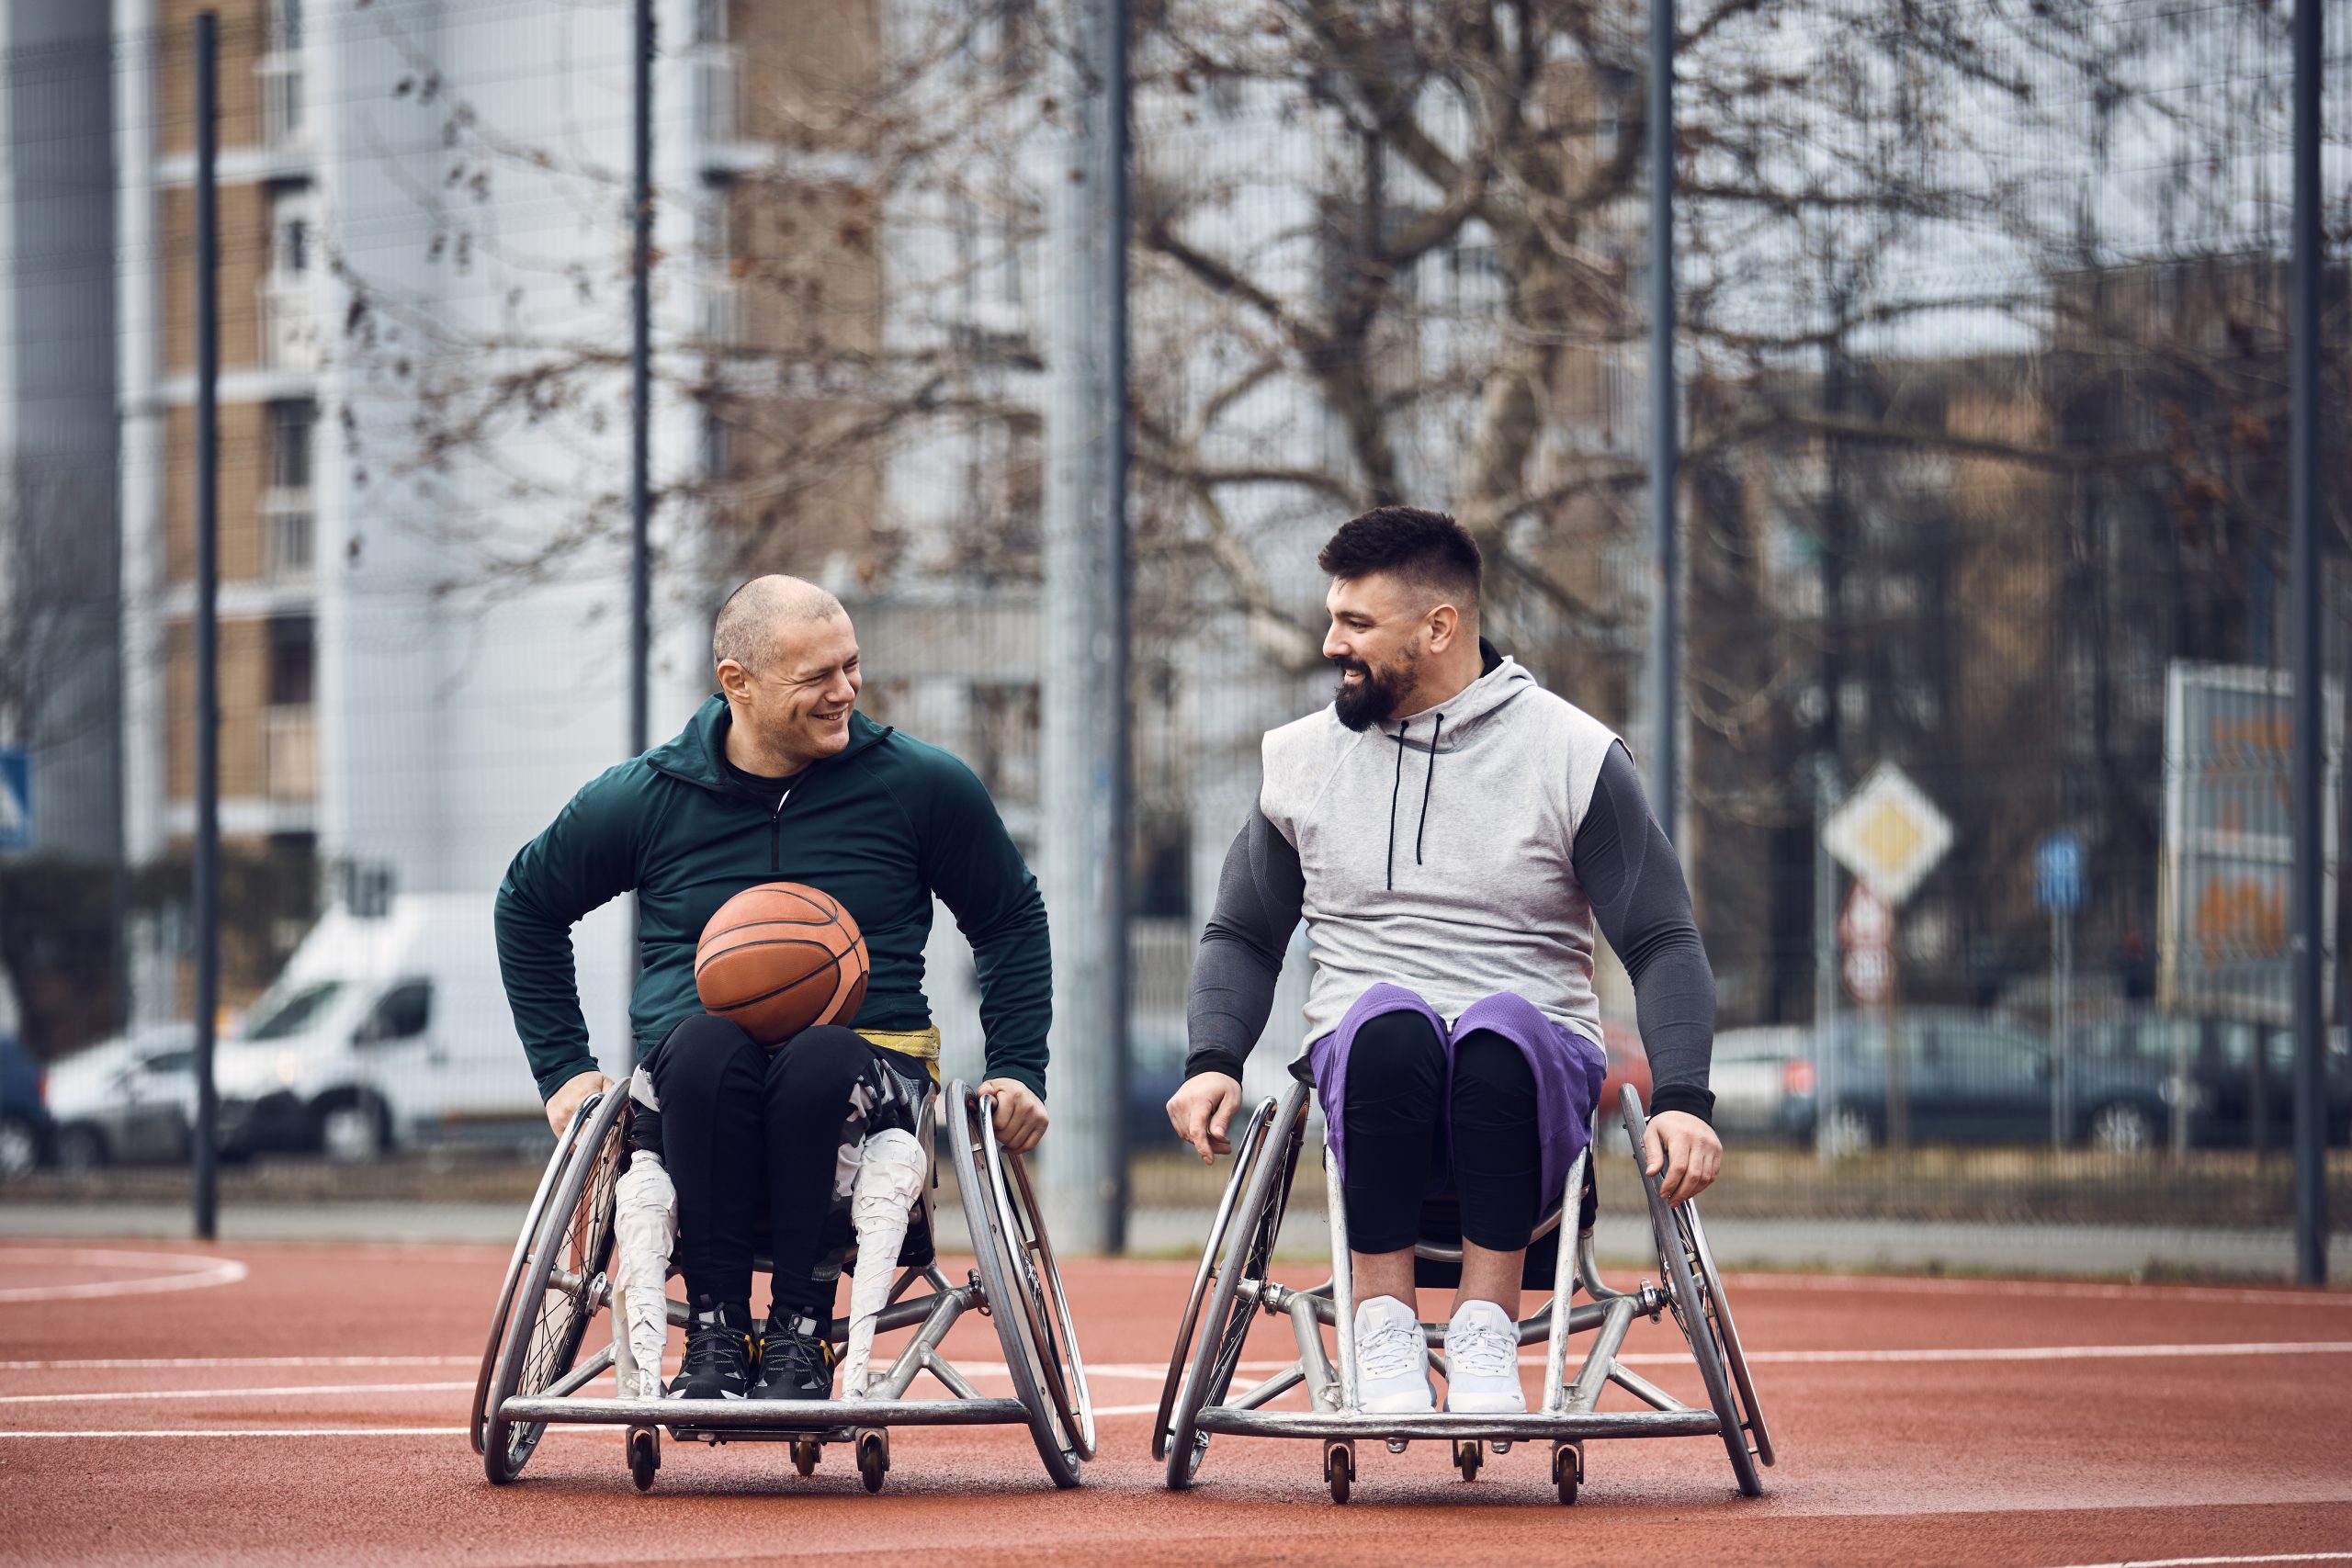 Two mean in wheelchairs laugh together as they prepare for a game of wheelchair basketball together.